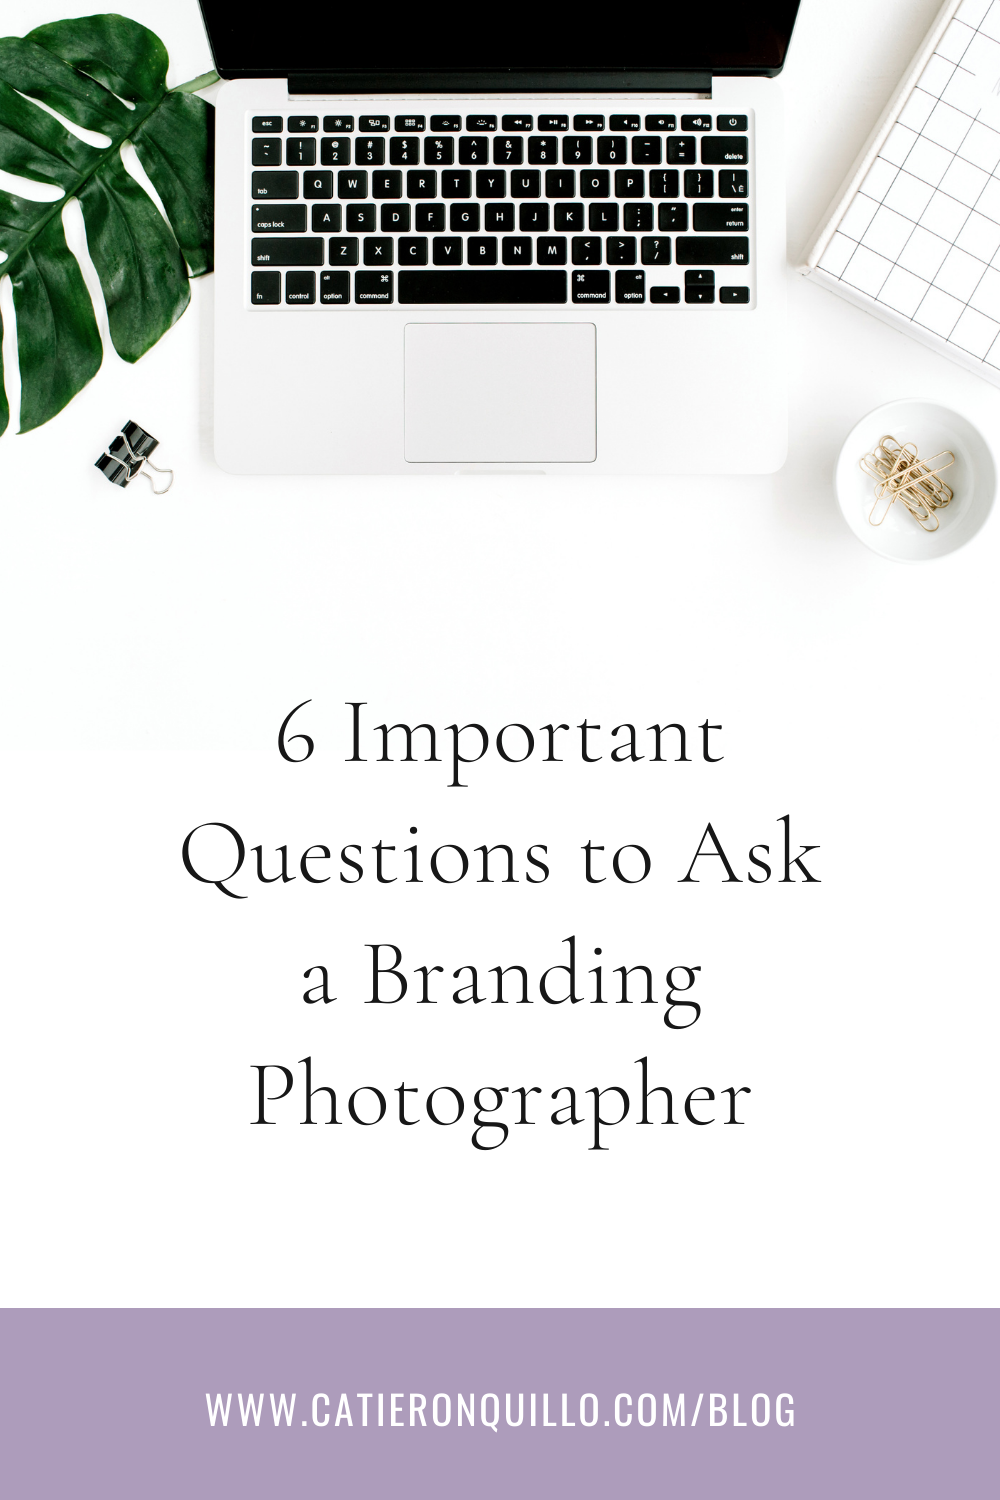 6 important questions to ask a branding photographer